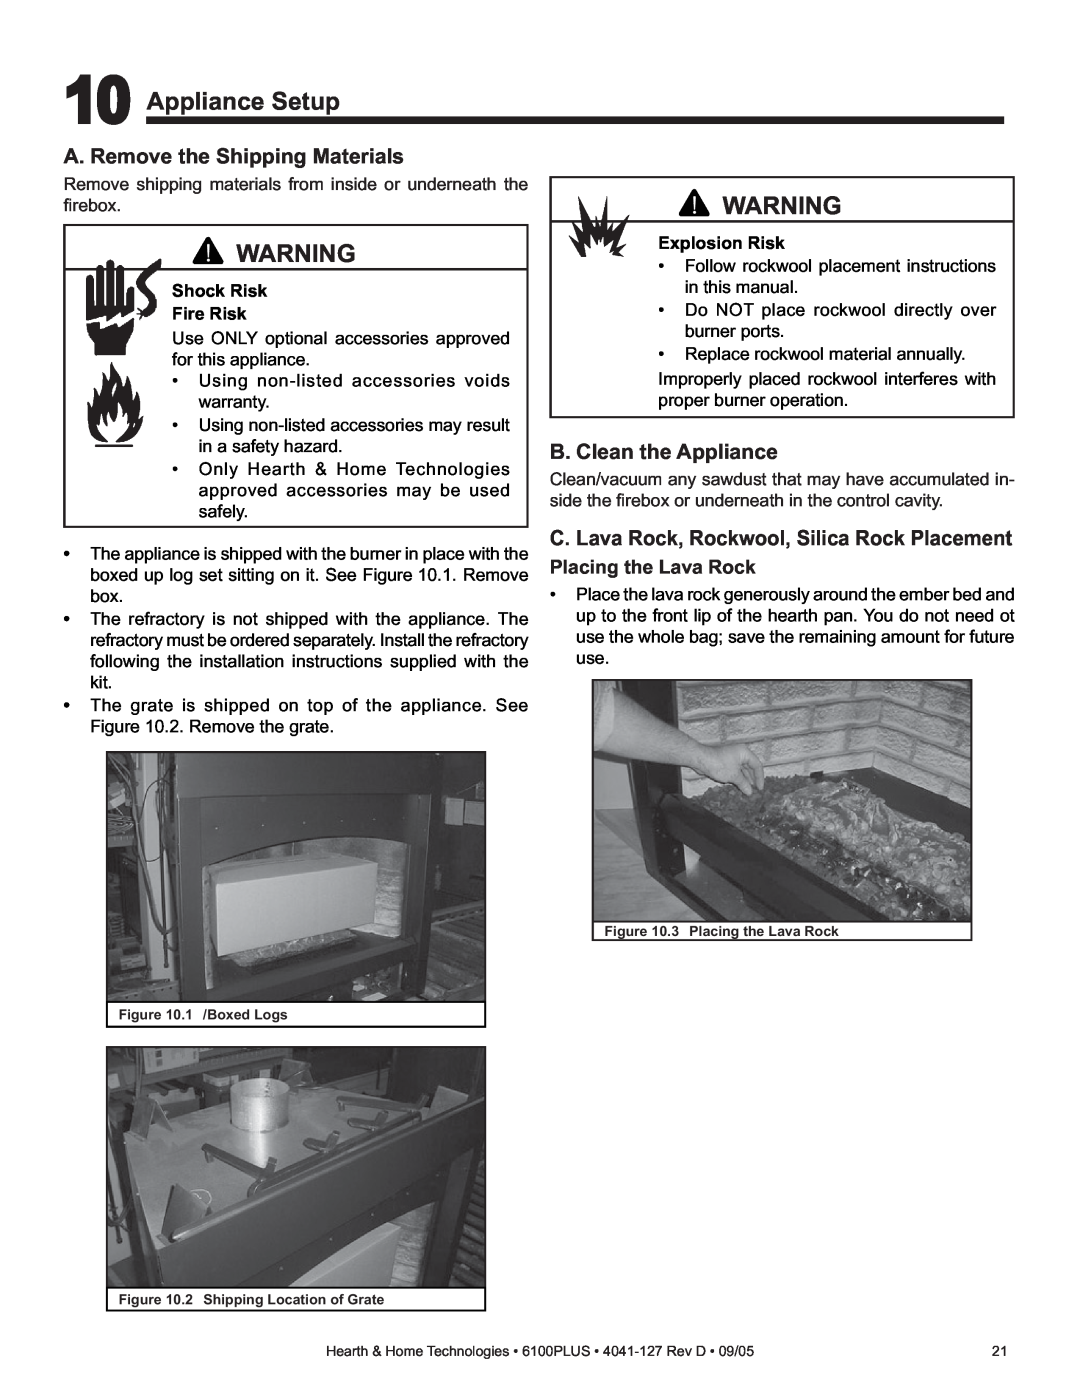 Heat & Glo LifeStyle 6100PLUS Appliance Setup, A. Remove the Shipping Materials, B. Clean the Appliance, Explosion Risk 